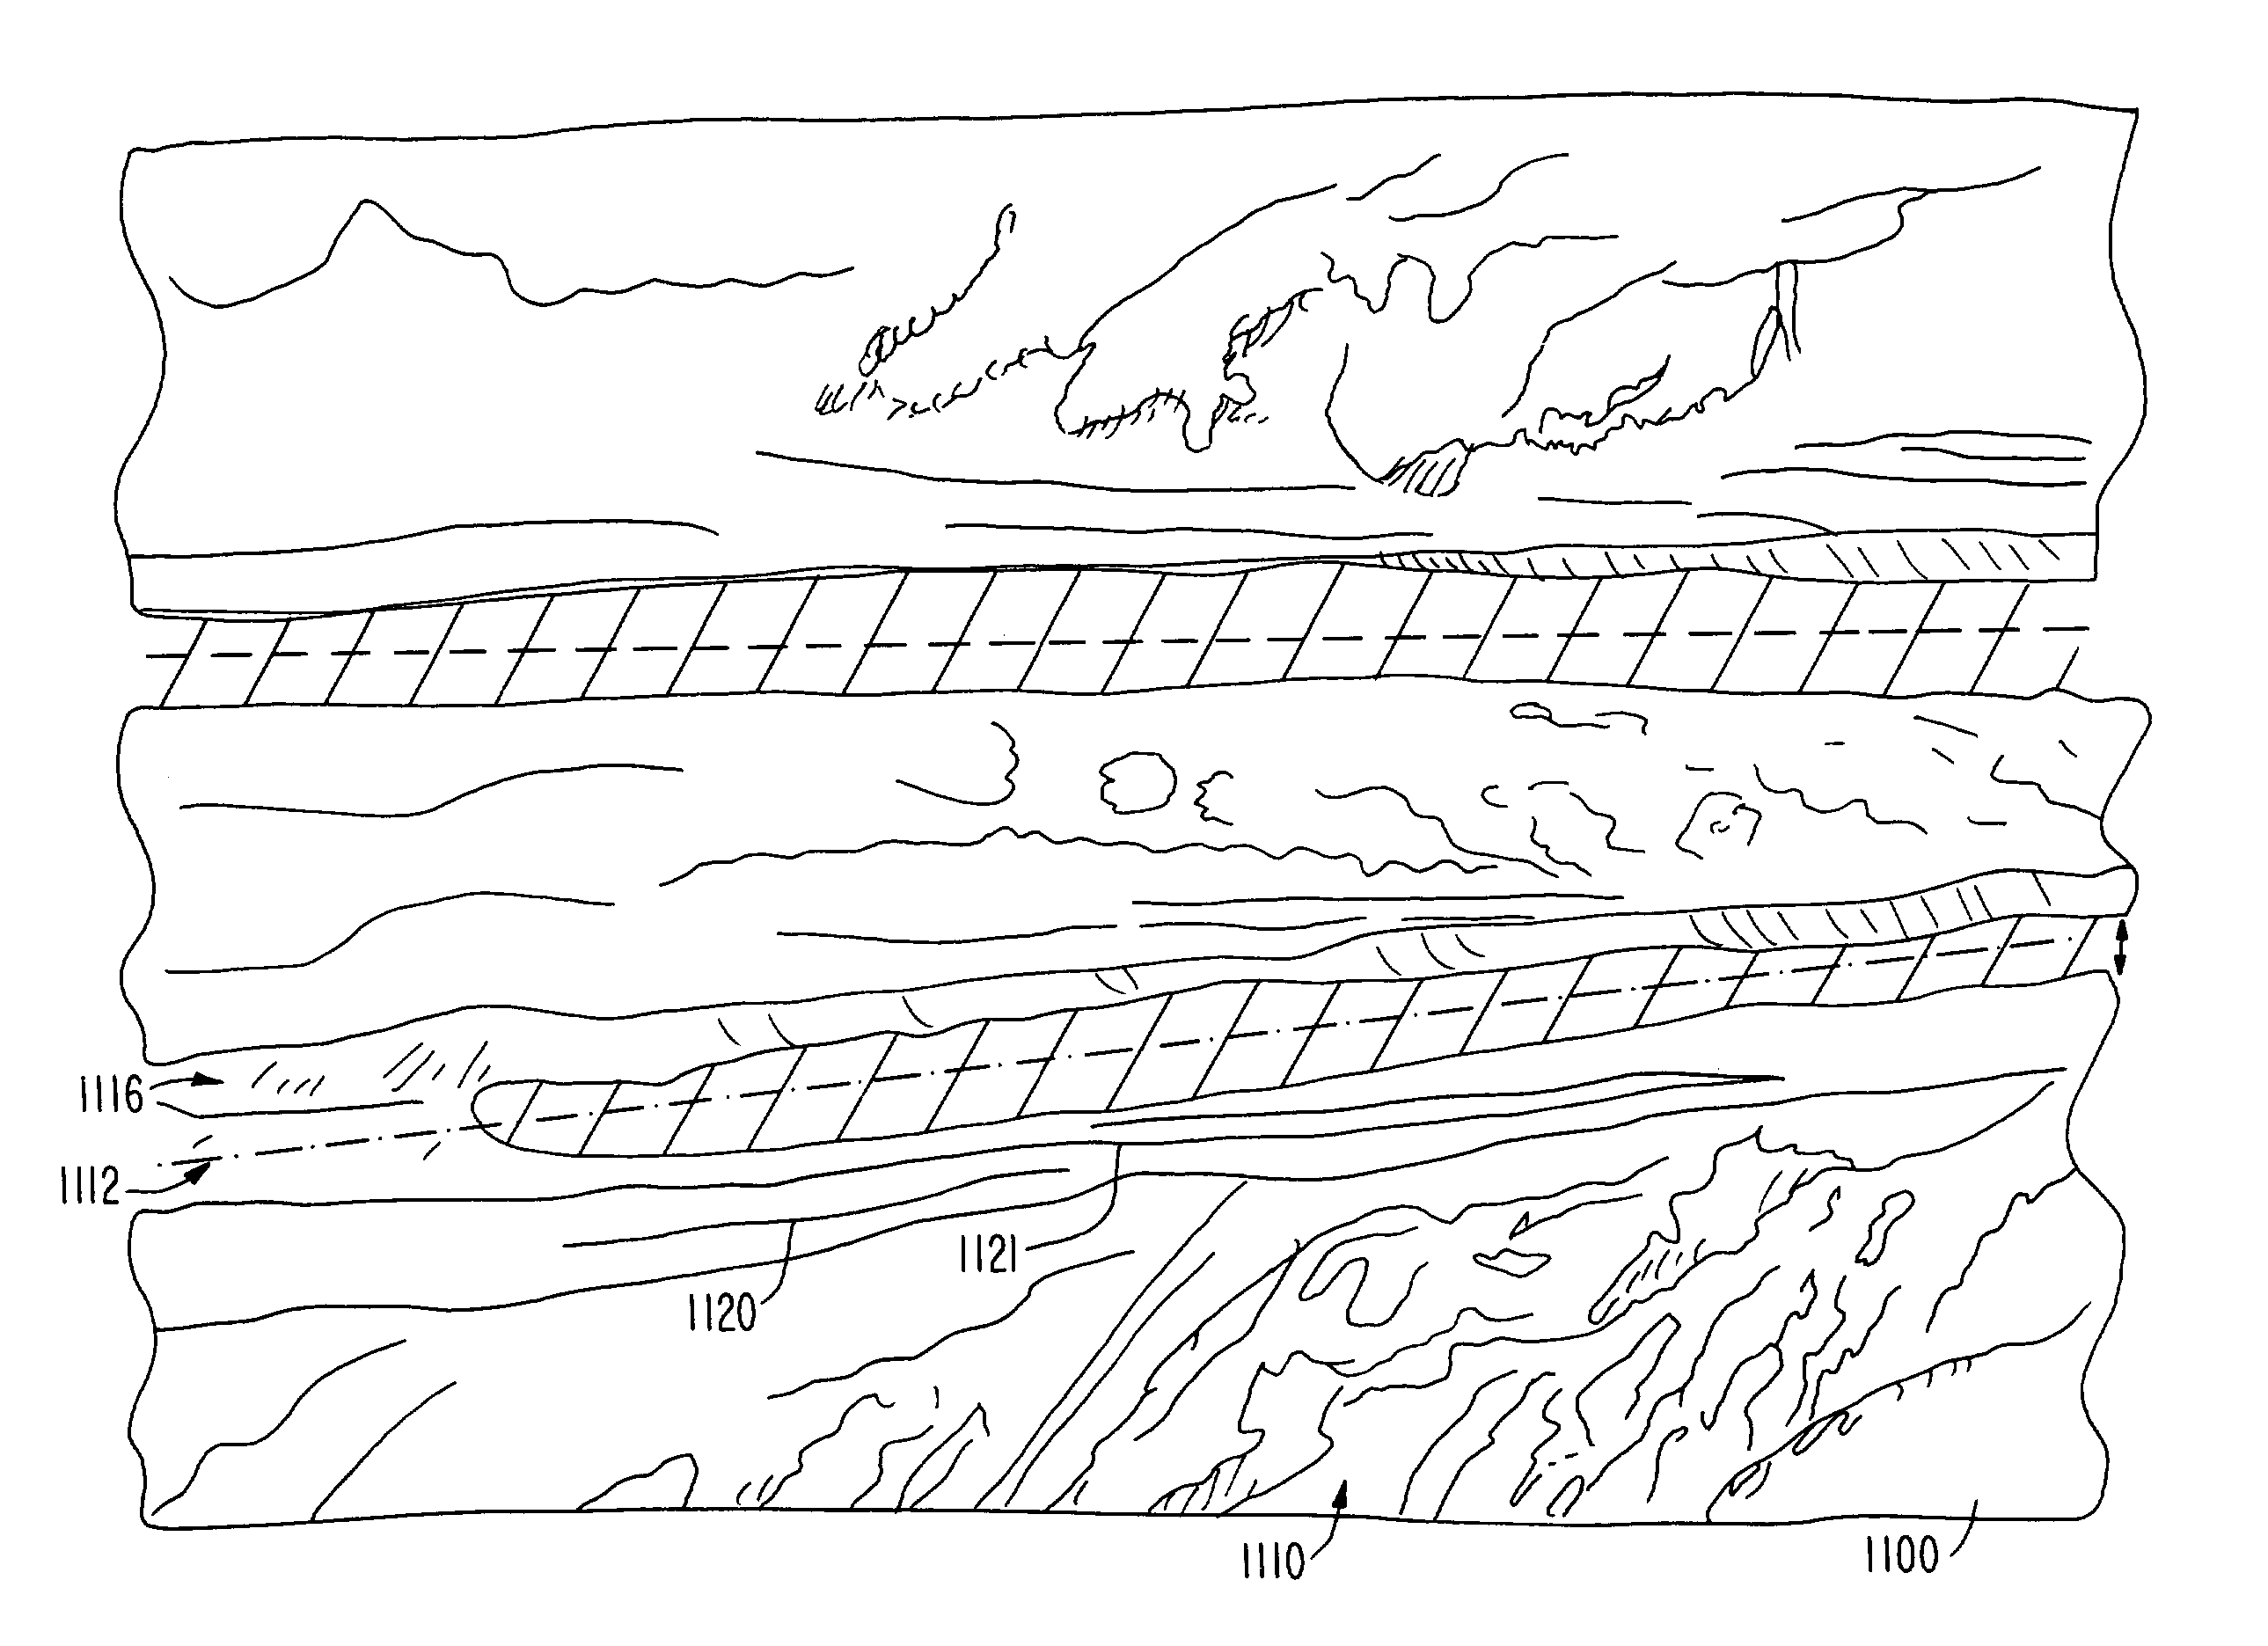 Accelerated steel cutting methods and machines for implementing such methods